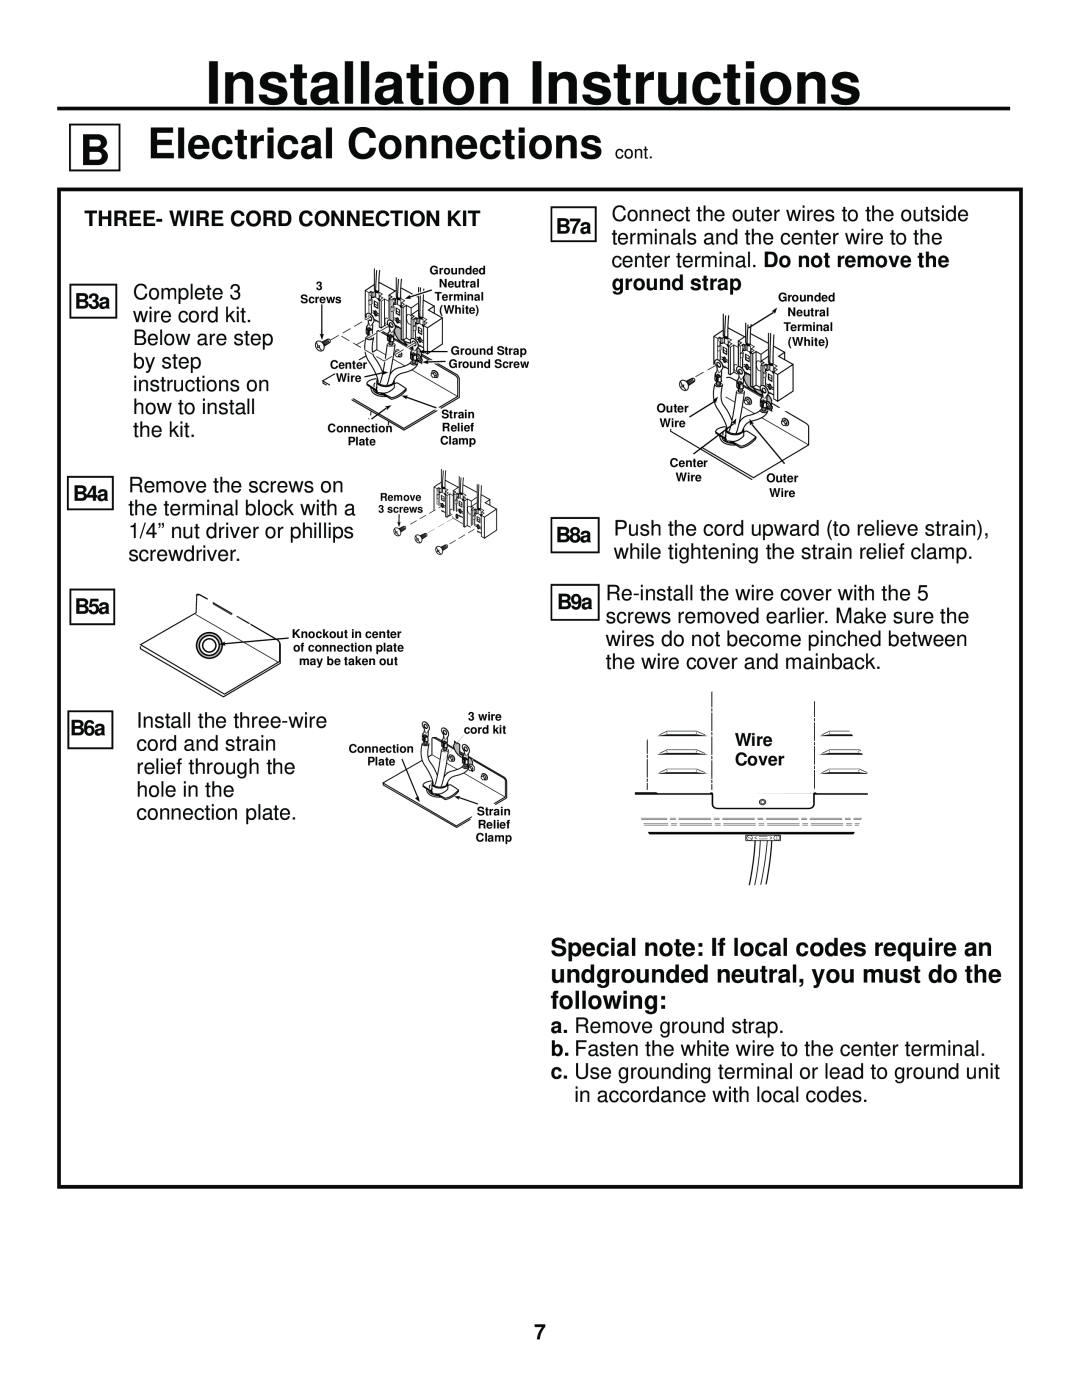 GE 31-10463 Installation Instructions, Electrical Connections cont, Three- Wire Cord Connection Kit, ground strap 